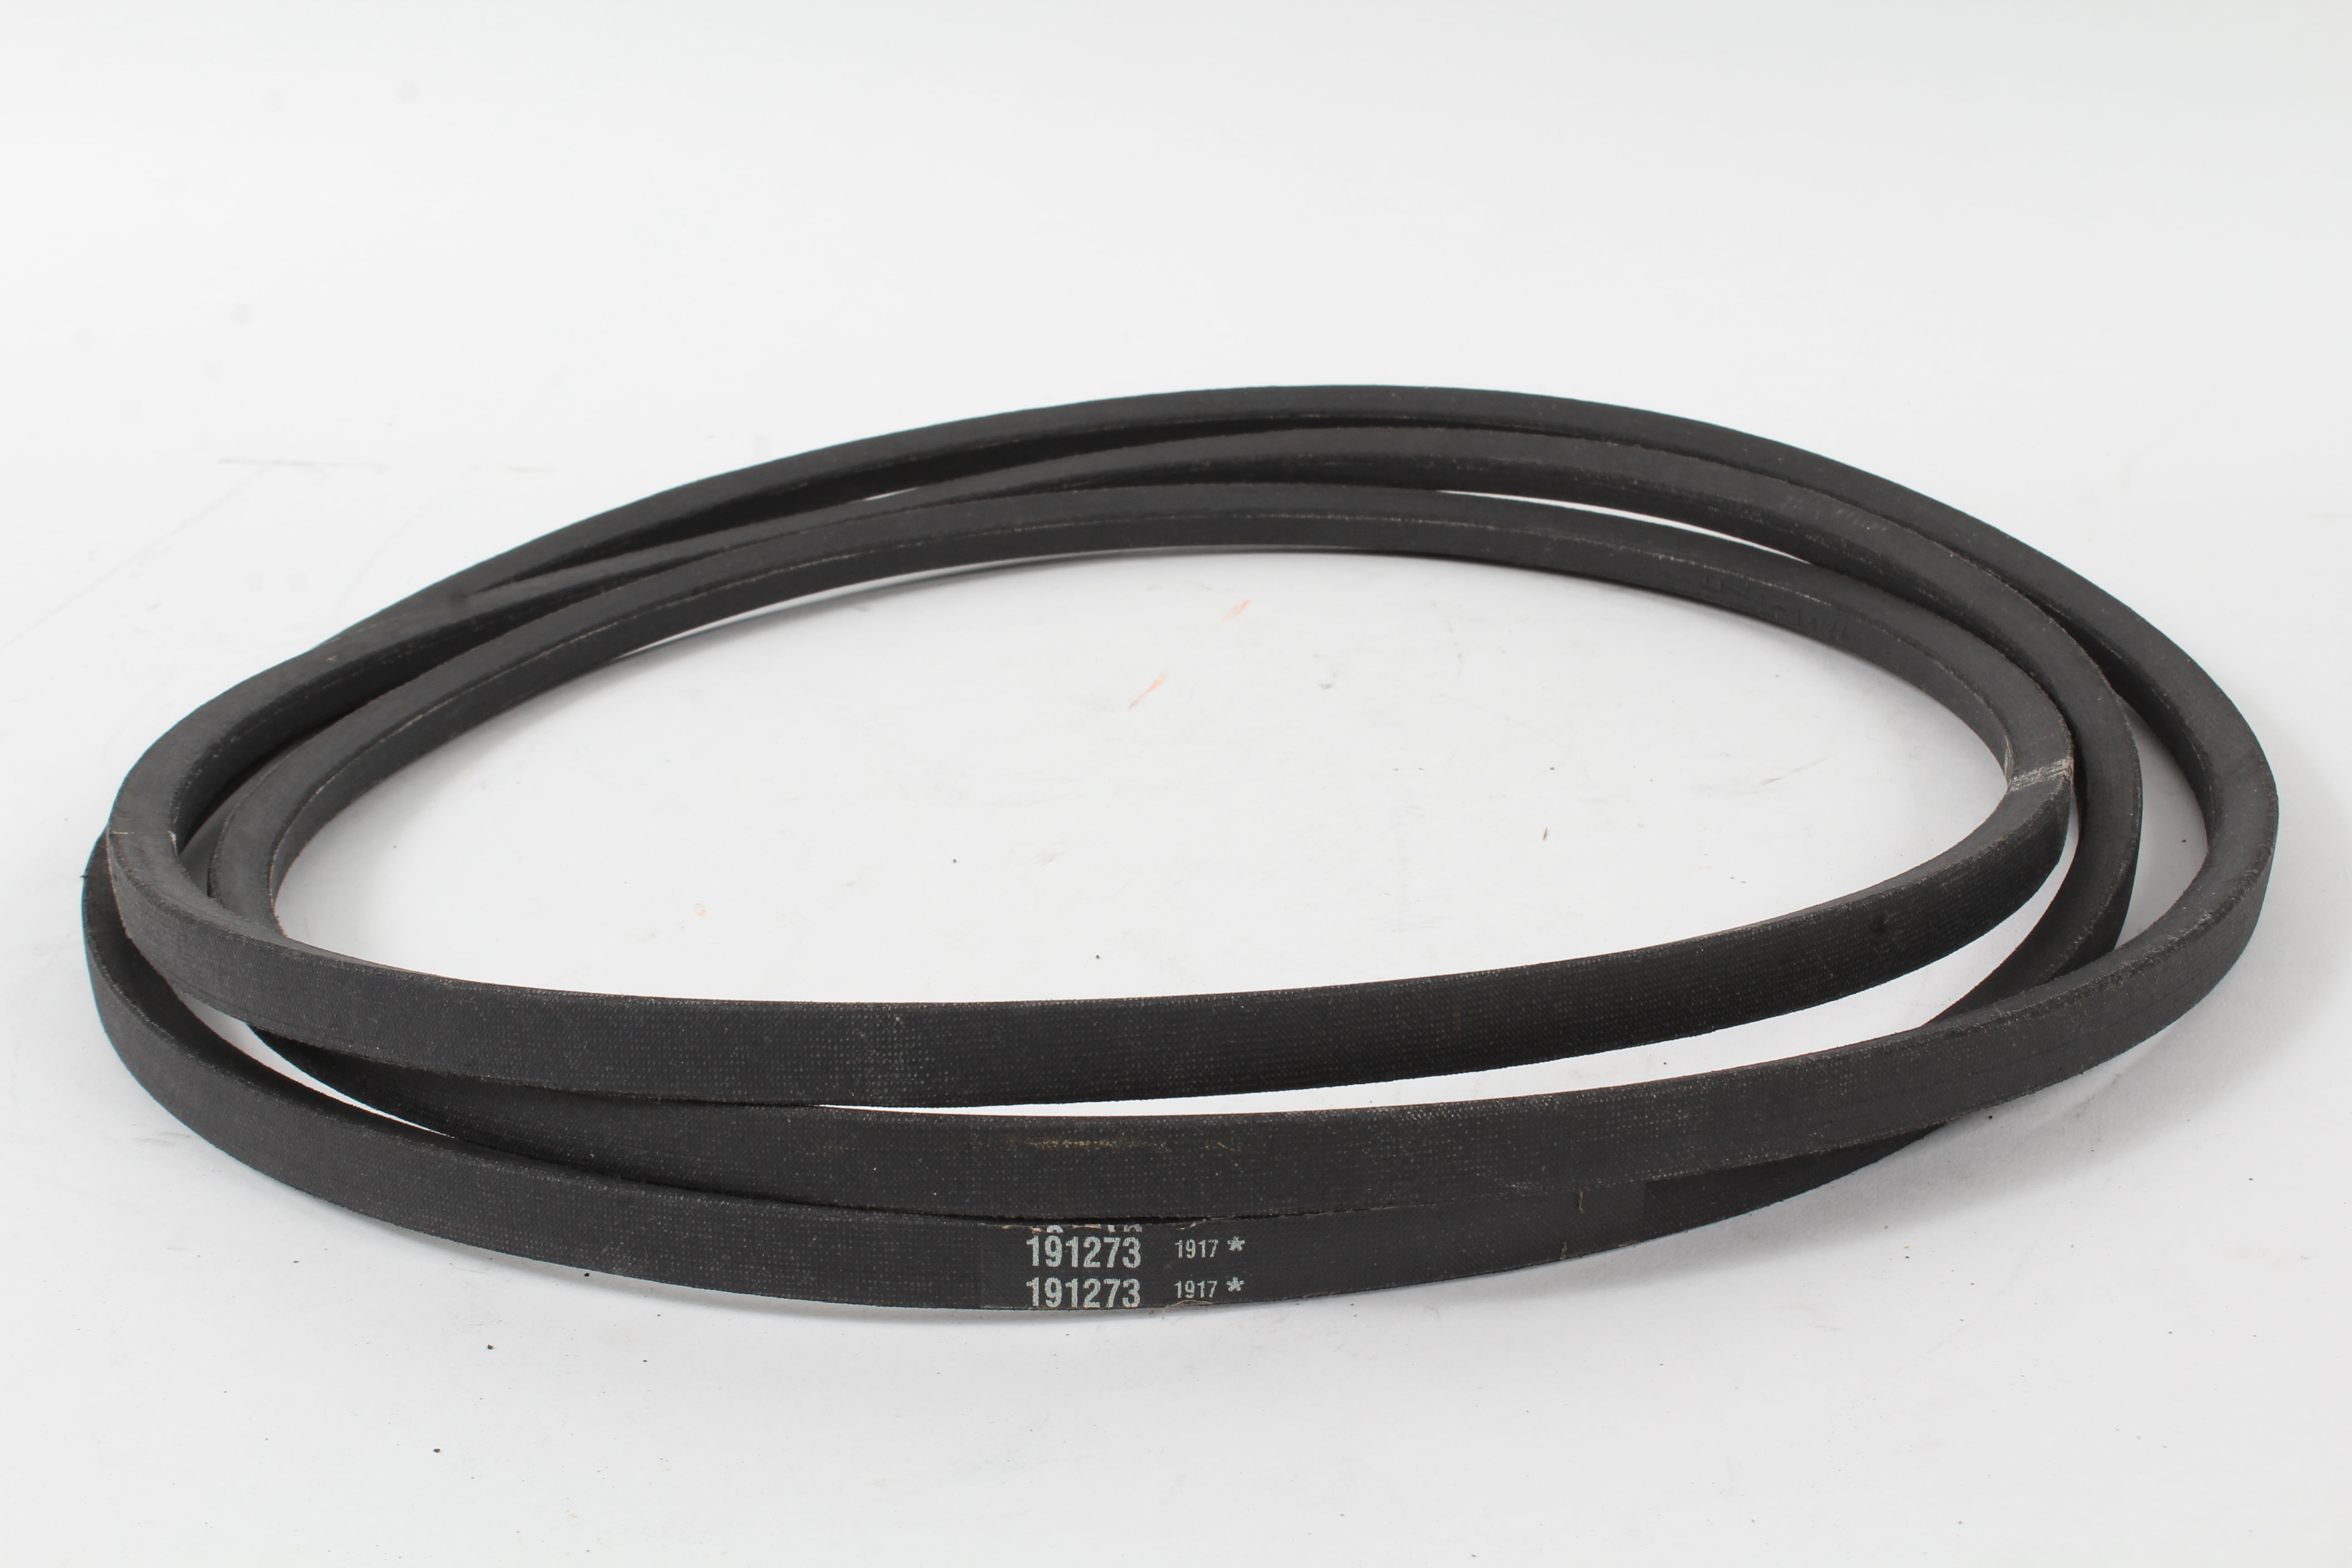 Details about   Husqvarna 584451901 Genuine OEM Ground Drive Belt 54"replaces 191273 